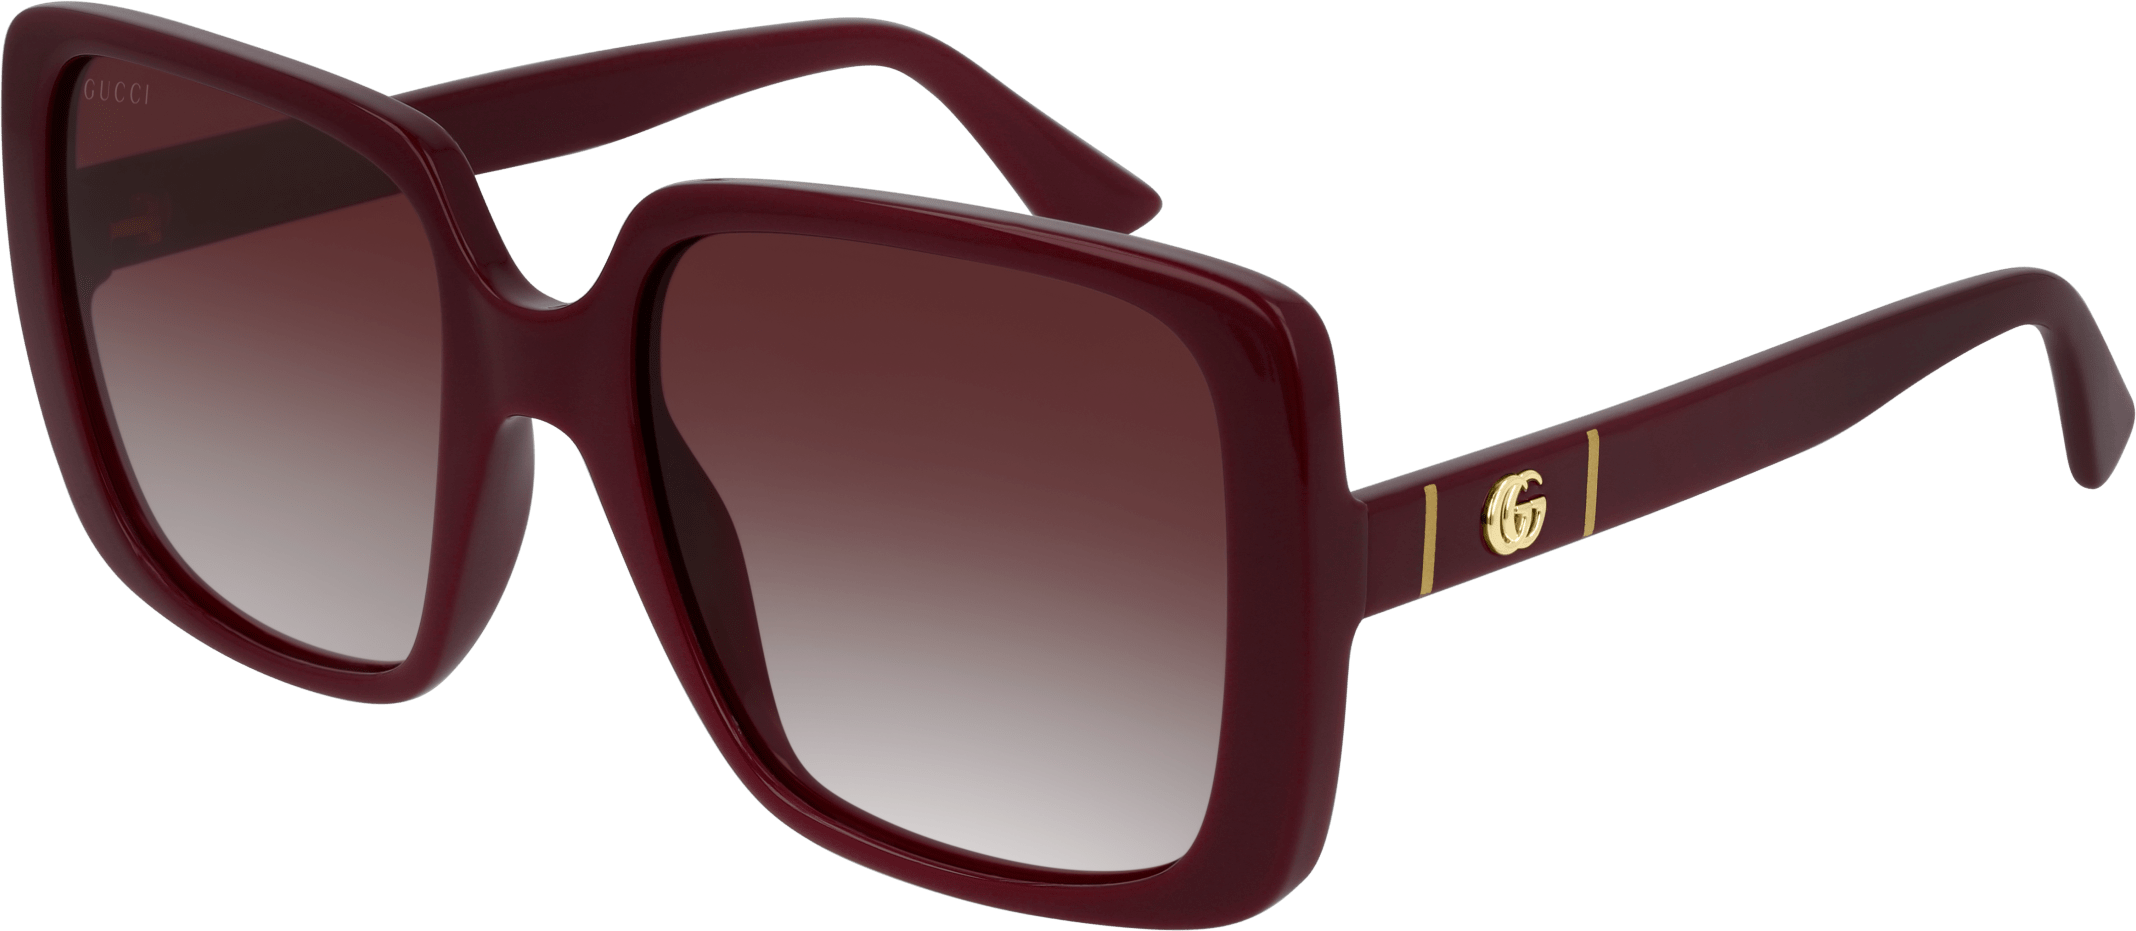 Color_GG0632S-003 - BURGUNDY - RED - GRADIENT